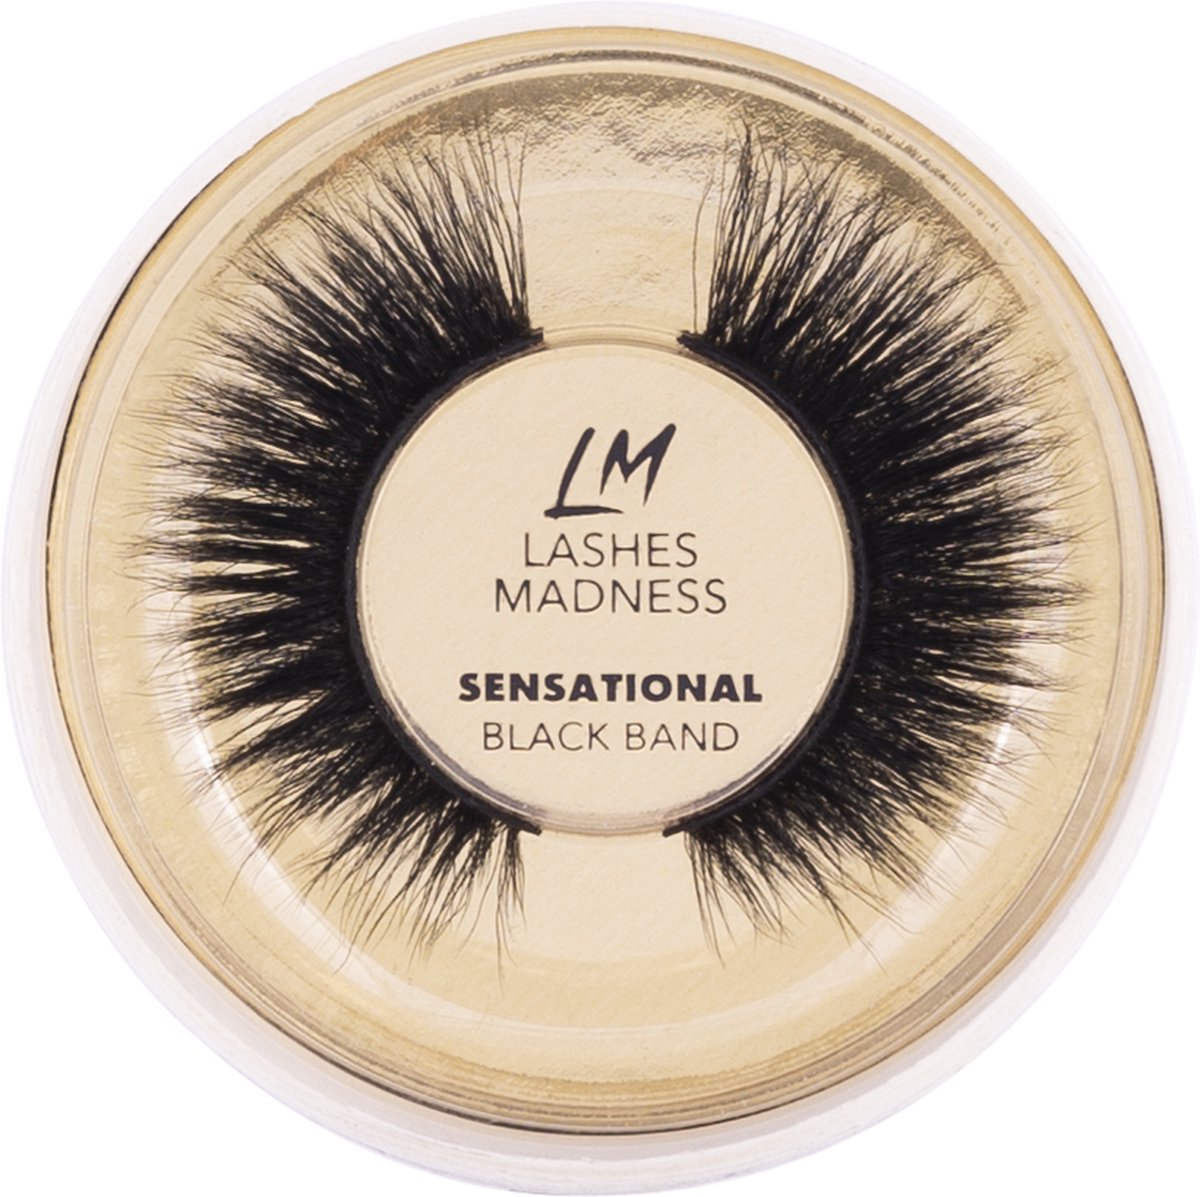 Lashes Madness - SENSATIONAL - Black Band - Vegan Mink Lashes - Wimpers - Valse Wimpers - Eyelashes - Luxe wimpers